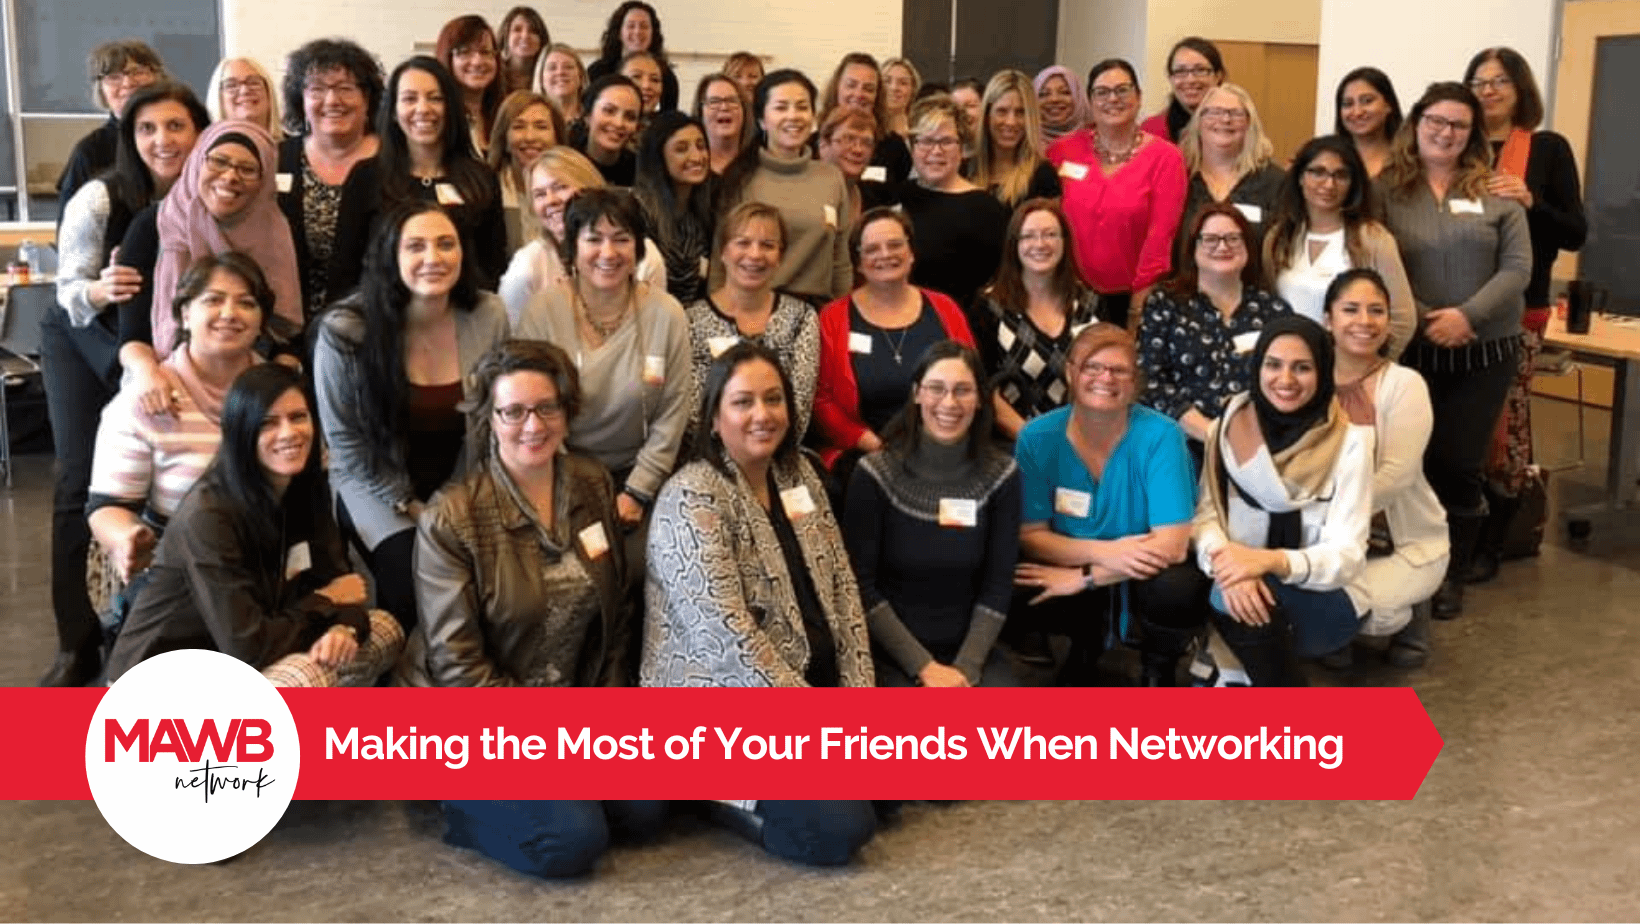 Group photo of businesswomen at a networking in Mississauga